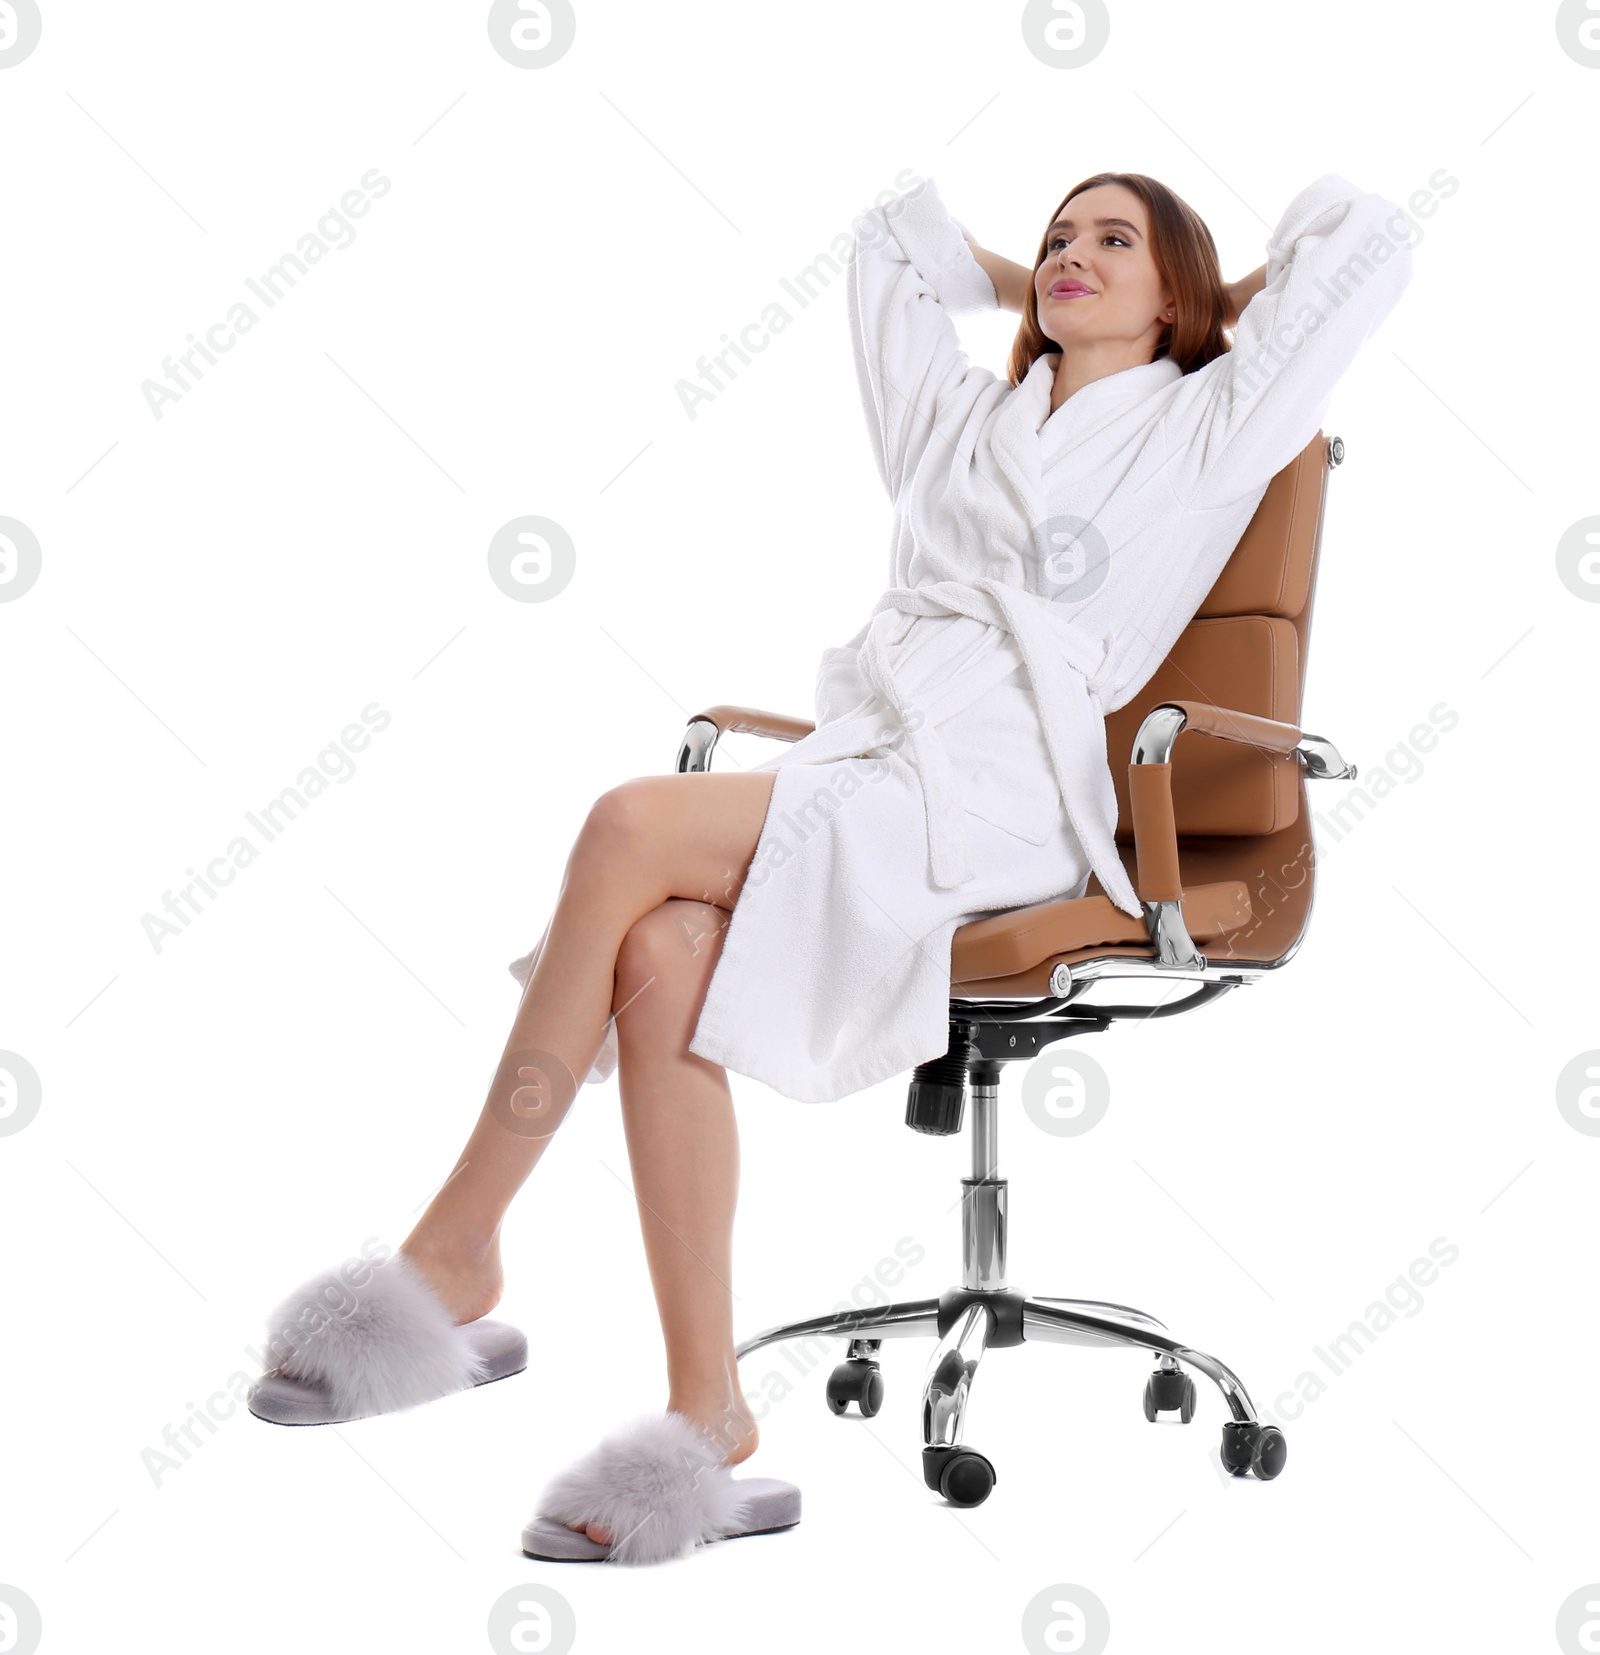 Photo of Young woman in bathrobe on white background